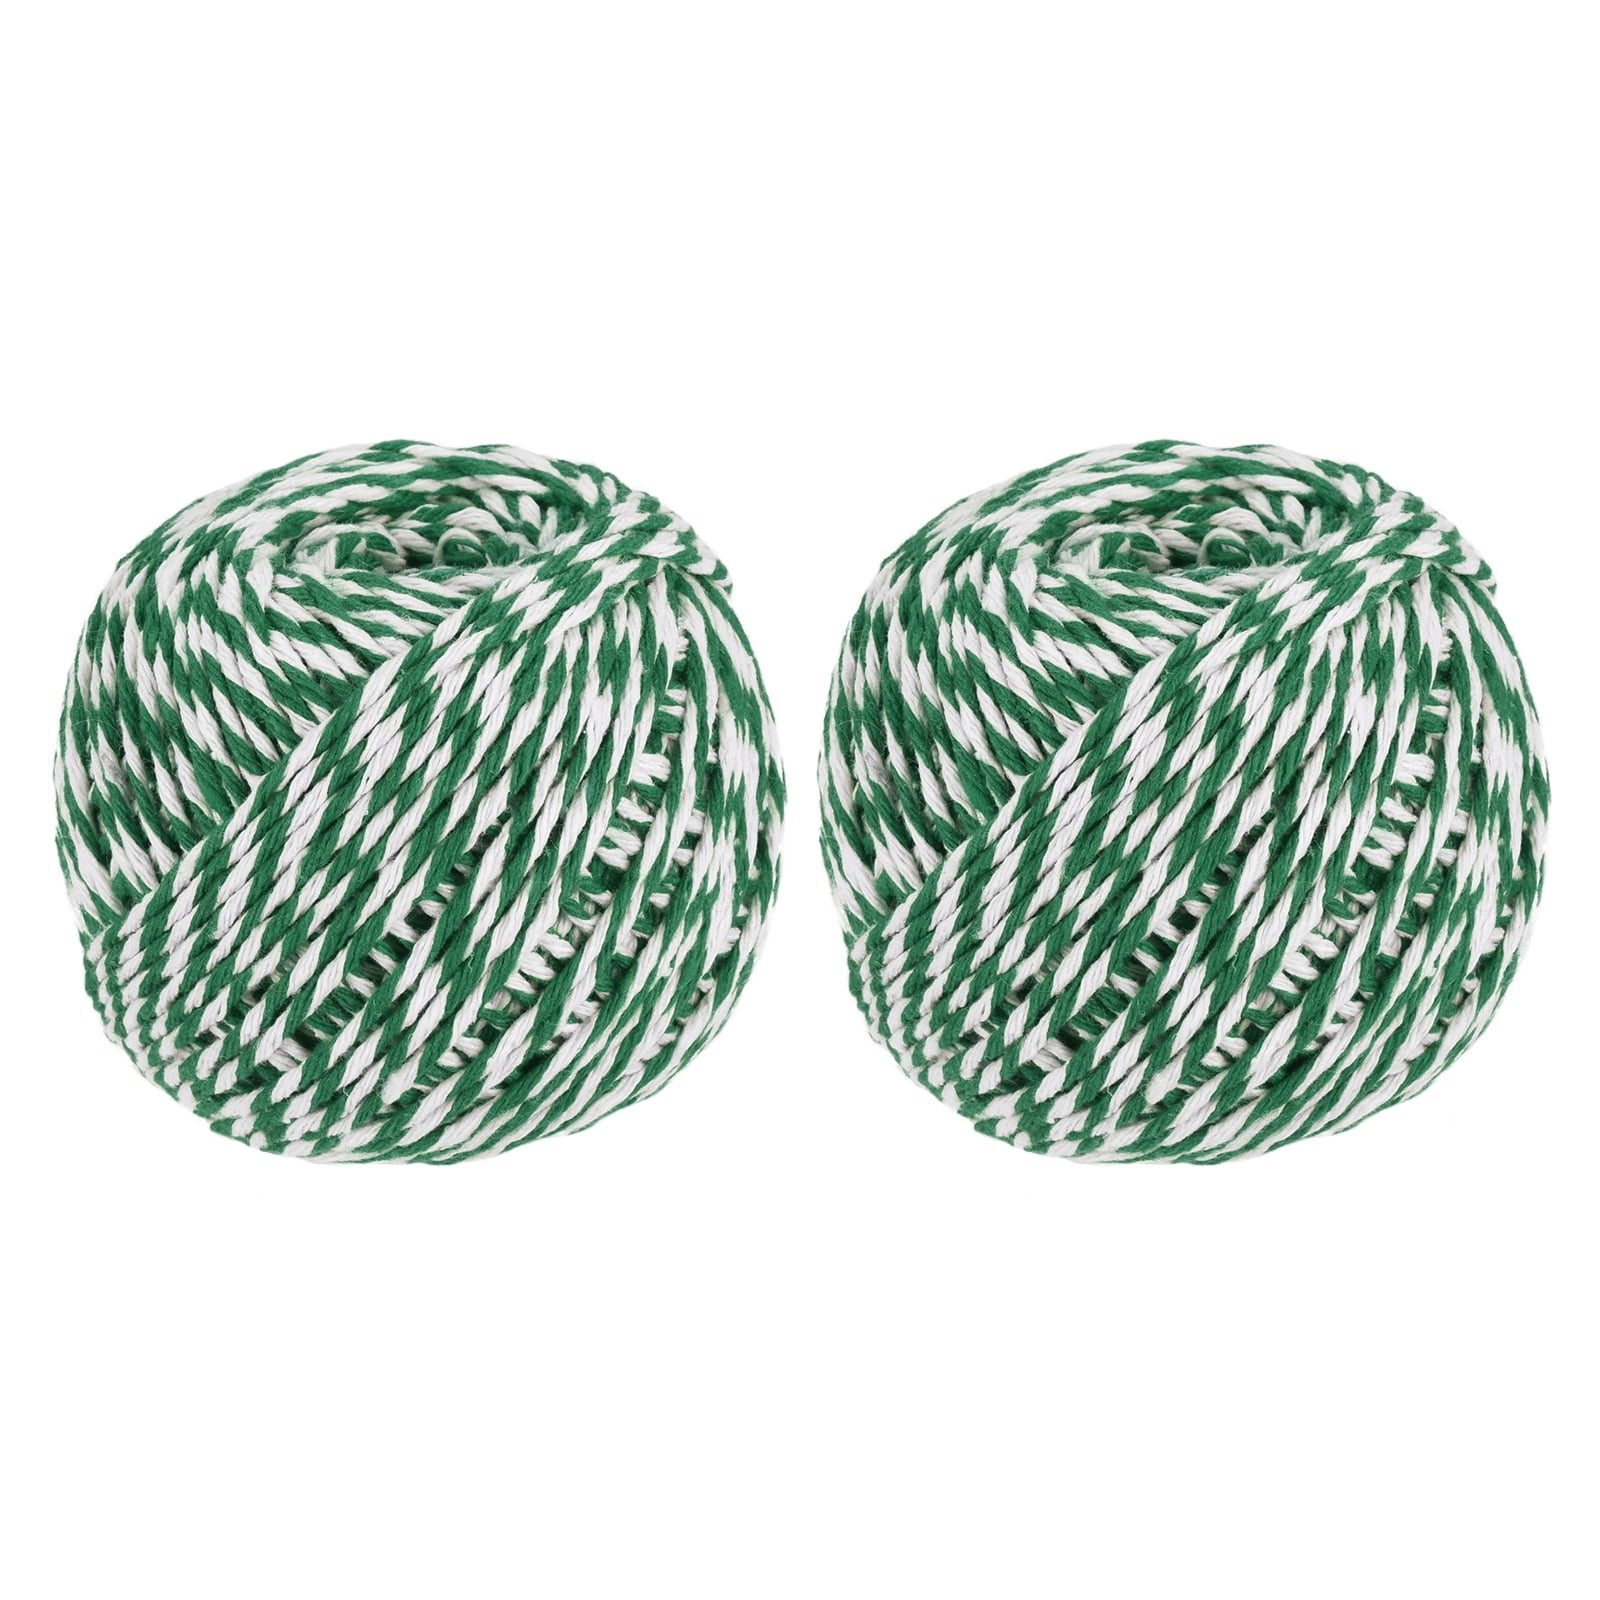 Twine Packing String Wrapping Cotton Twine 75M Green and White